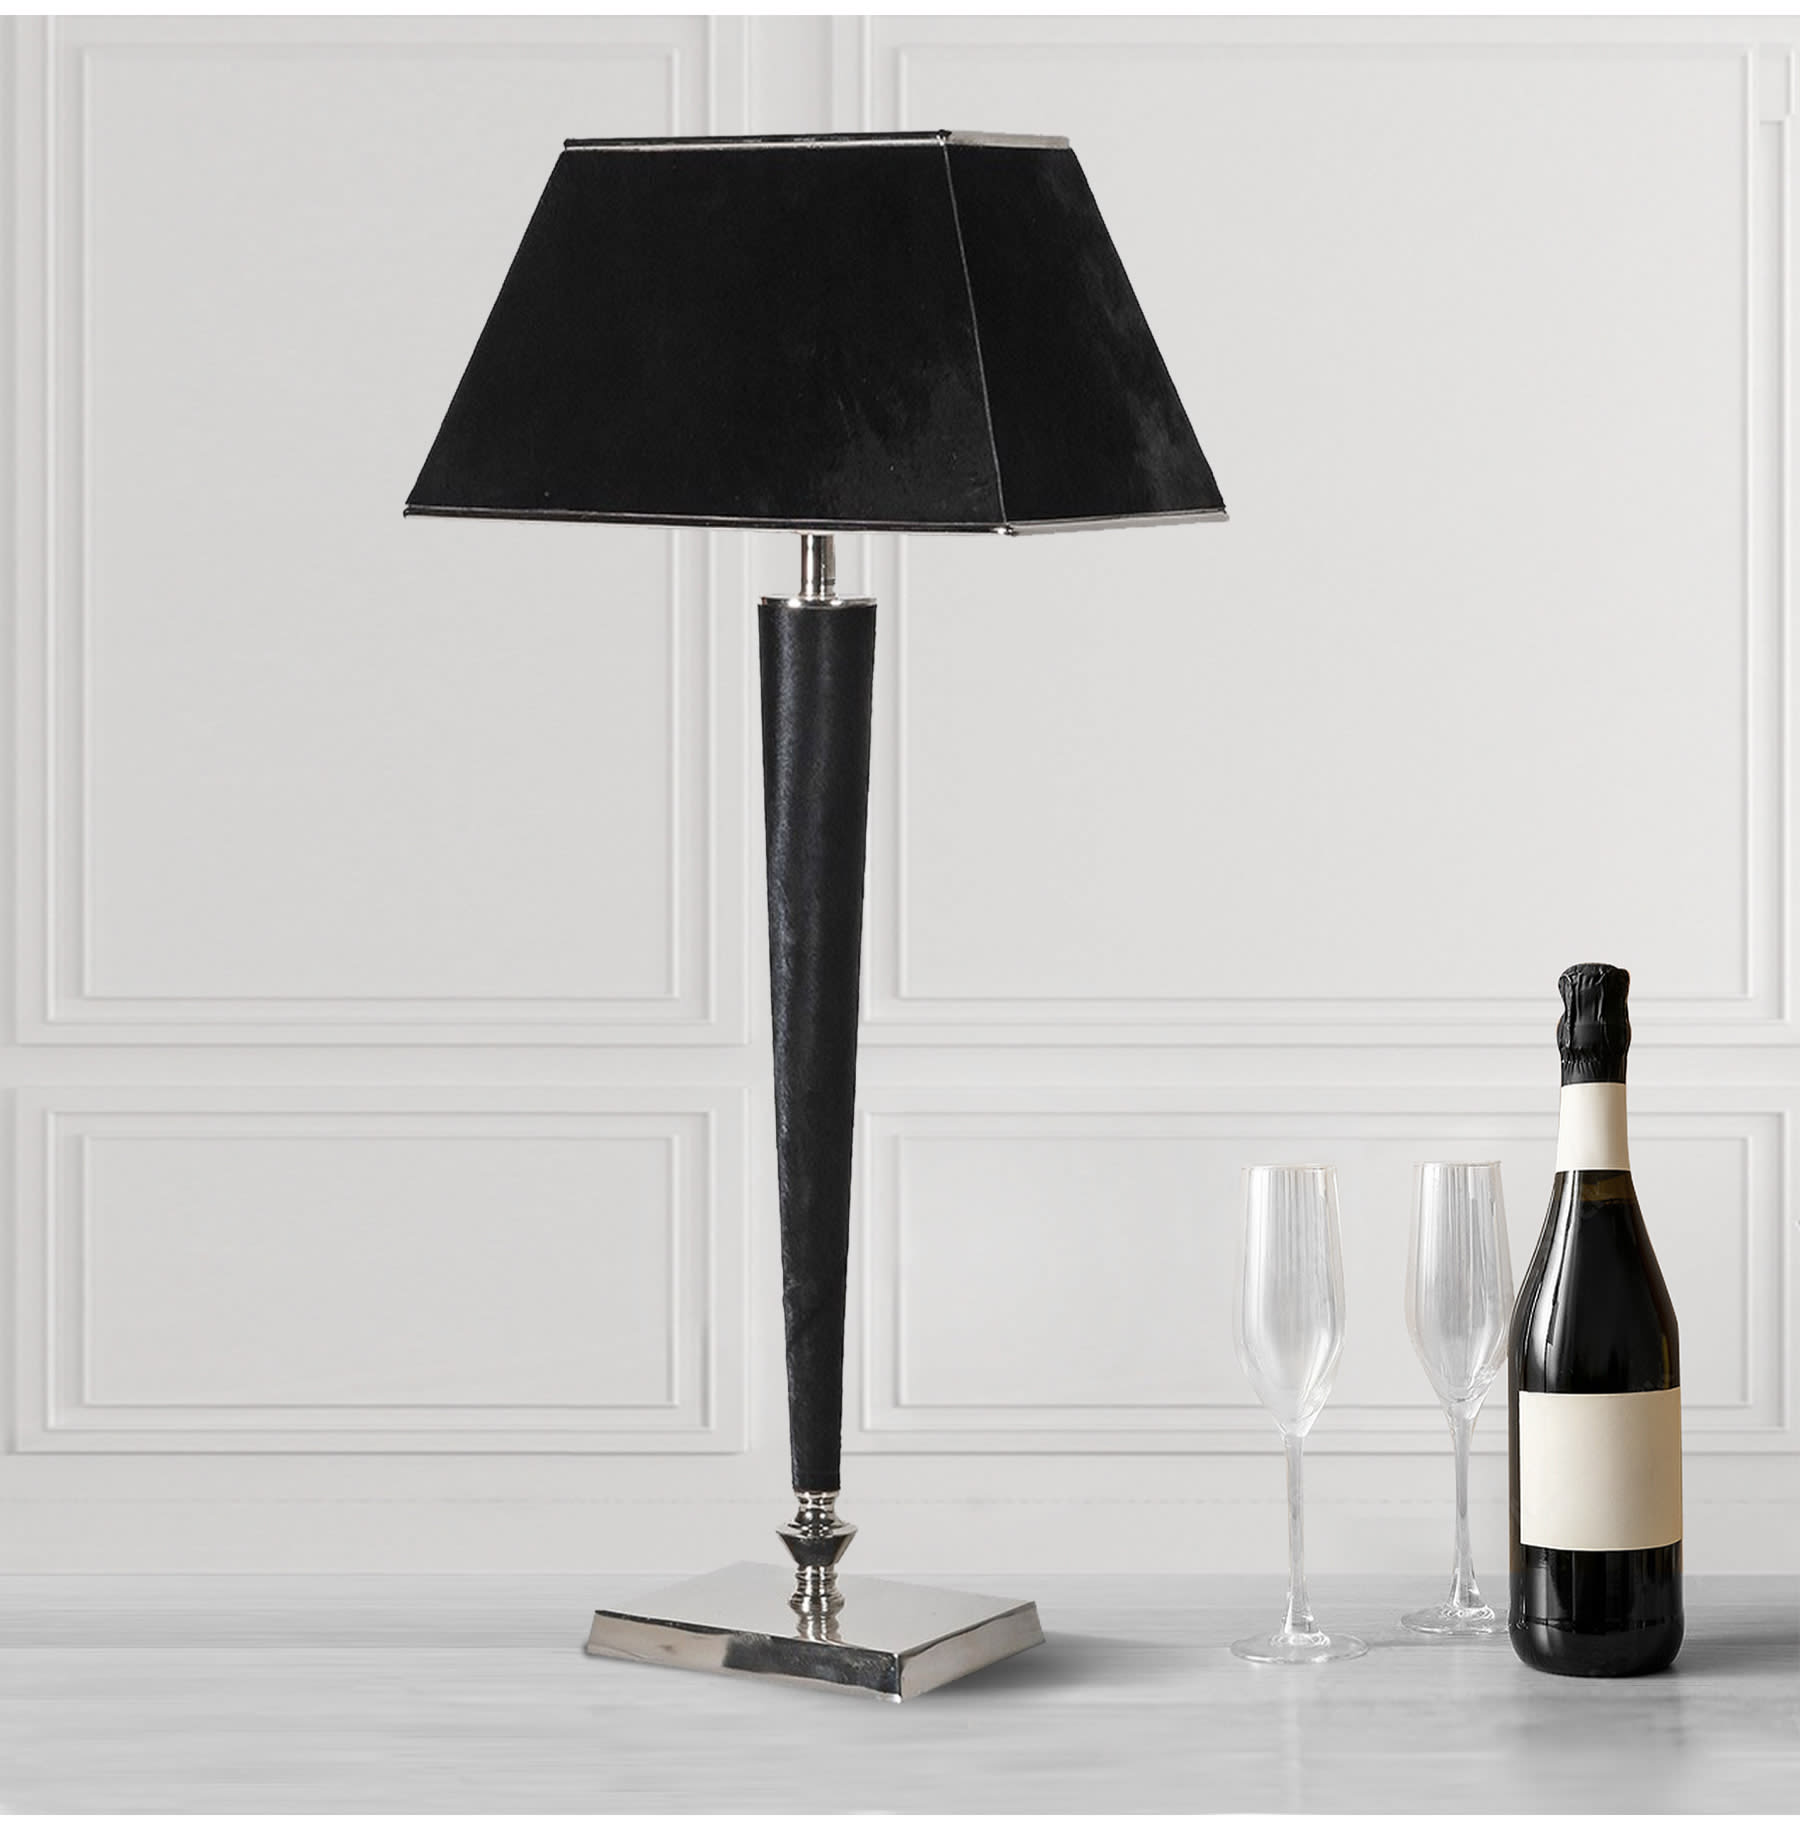 Polished metal table lamp with black texture lamp shade and stalk